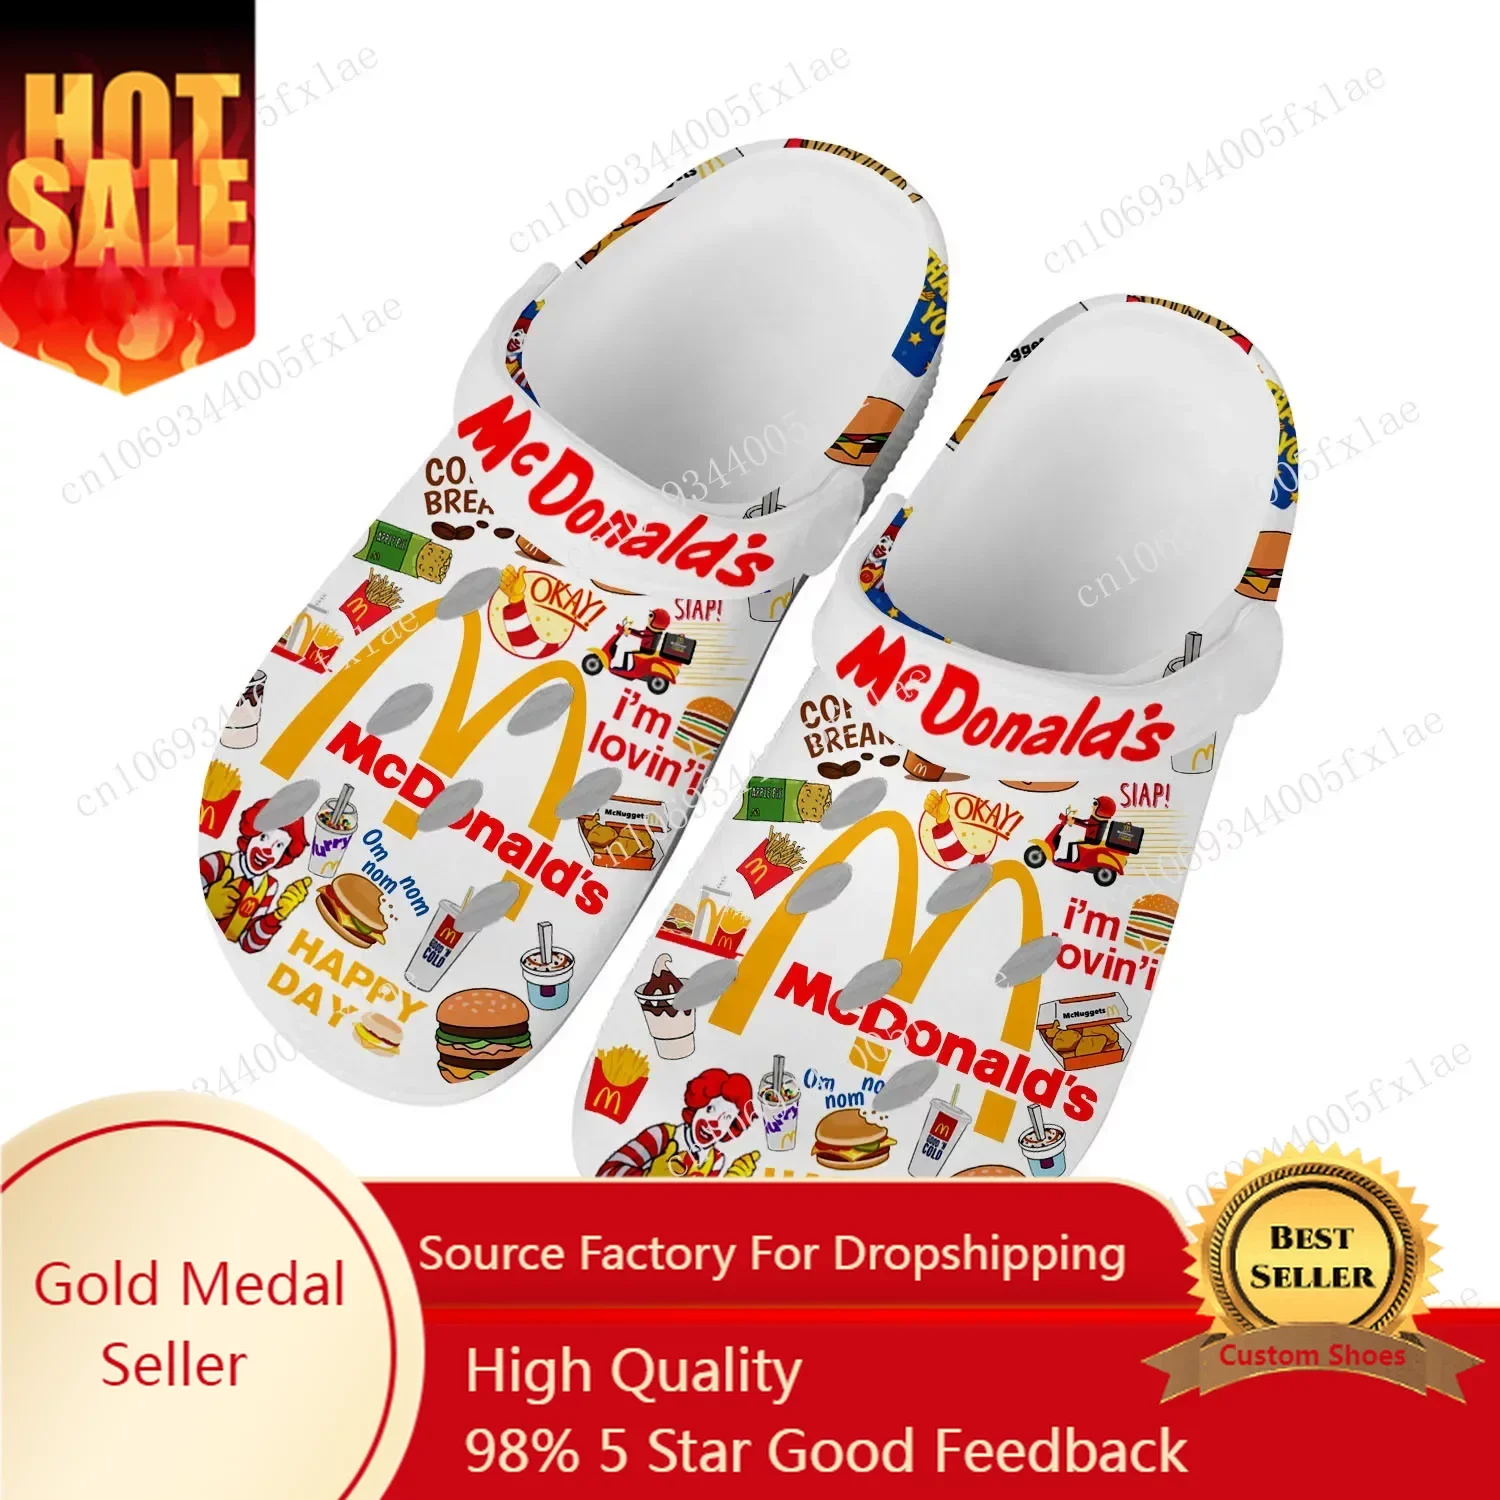 

Mc-Donalds Printing Home Clog Mens Women Teenager Sandals Shoes Garden Bespoke Customized Breathable Shoe Beach Hole Slippers